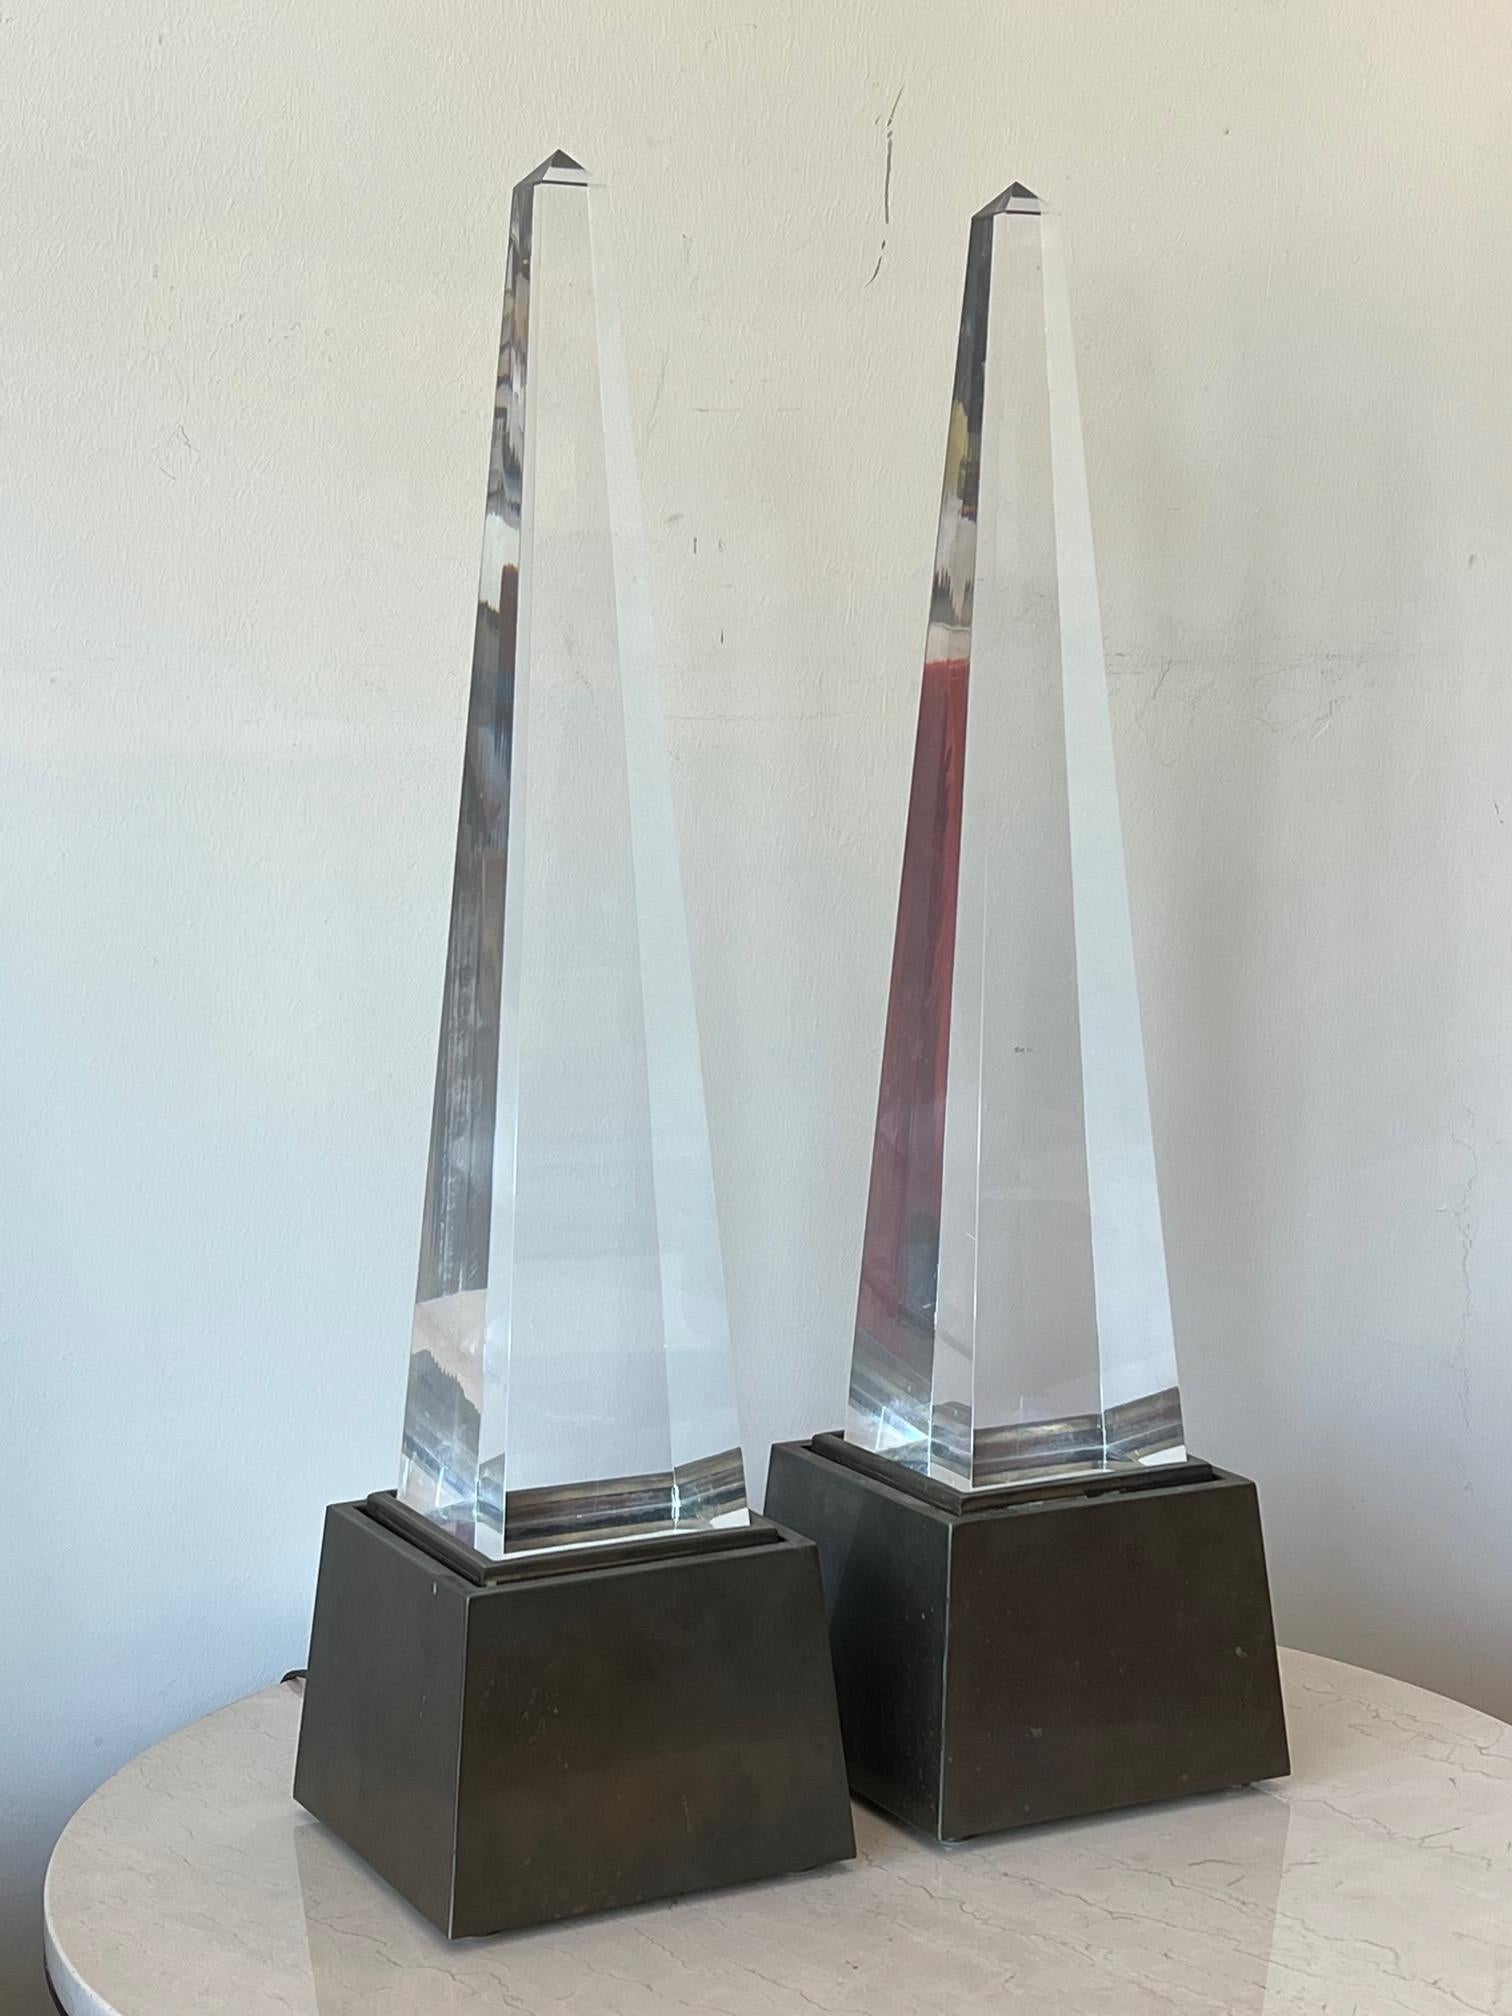 A pair of stylish Lucite and brass obelisk lamps by Chapman, 1977.